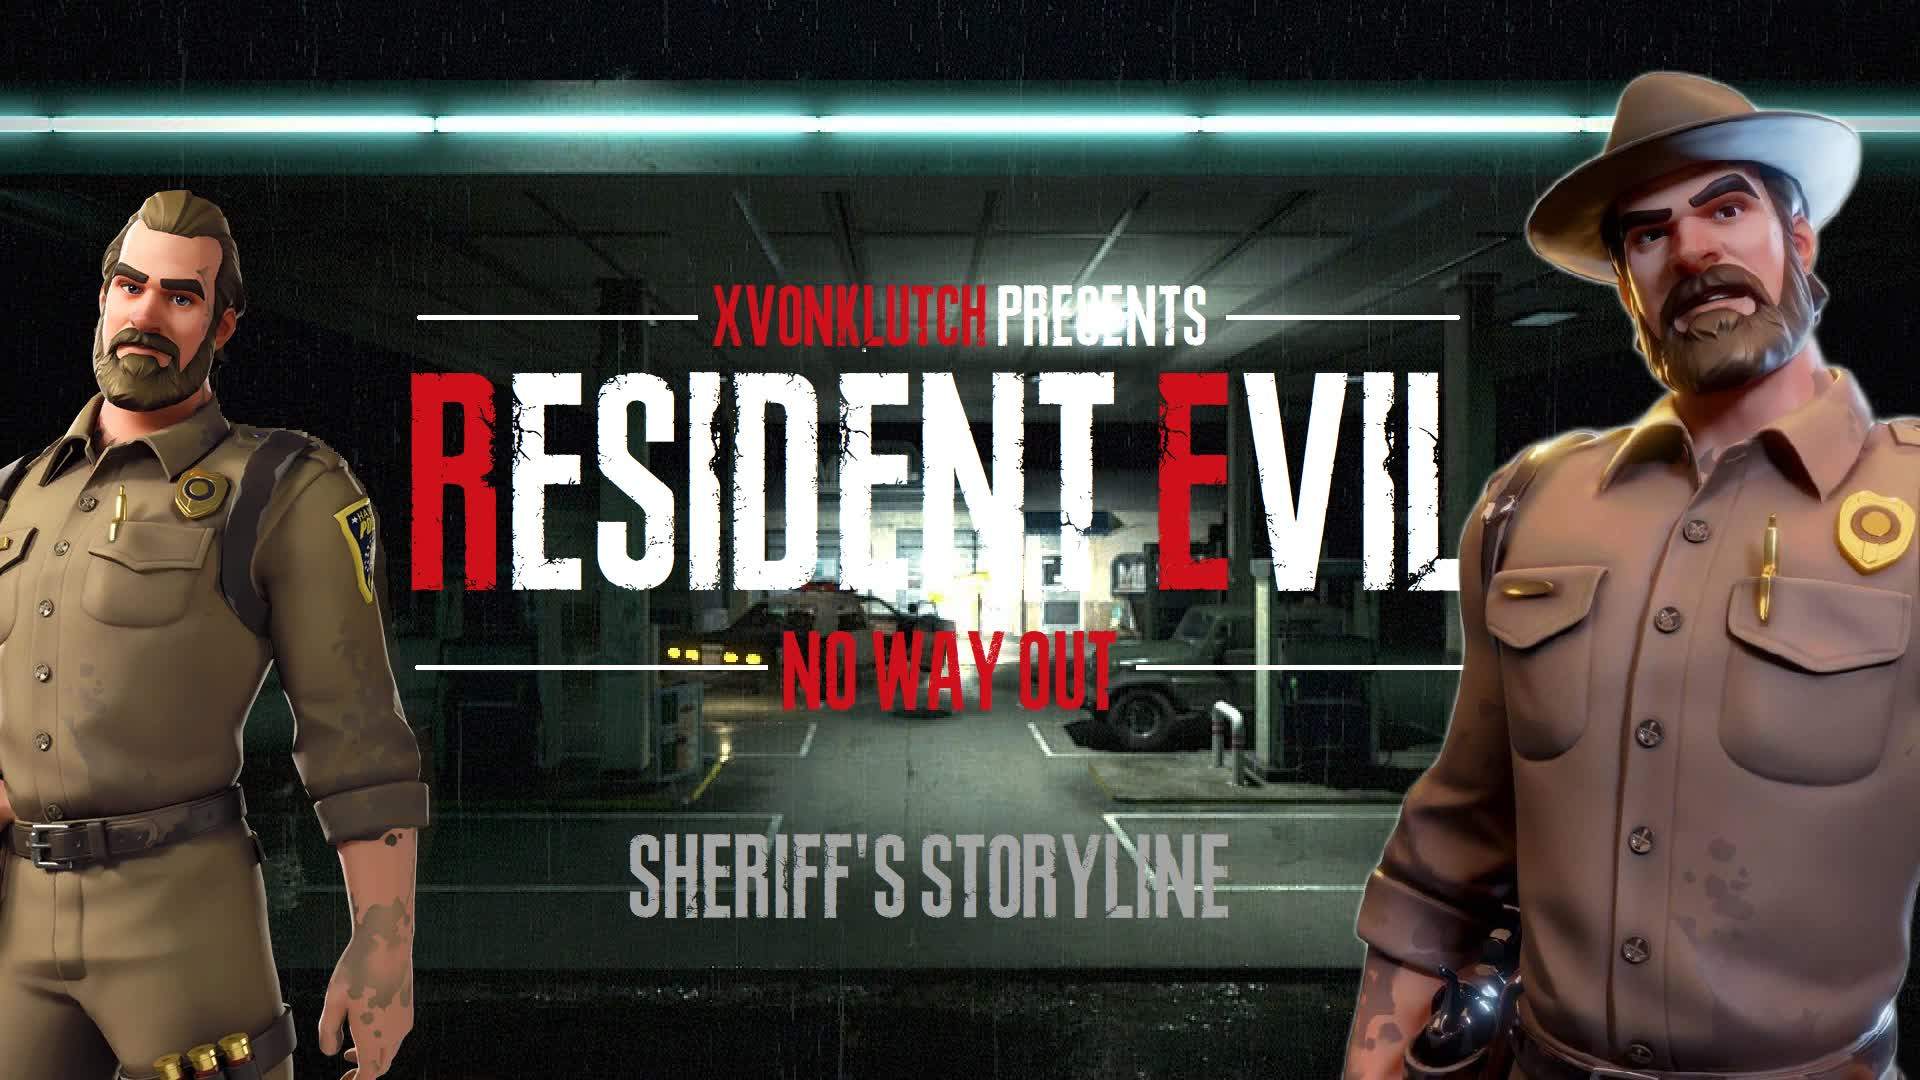 Resident Evil 2: No Way Out!